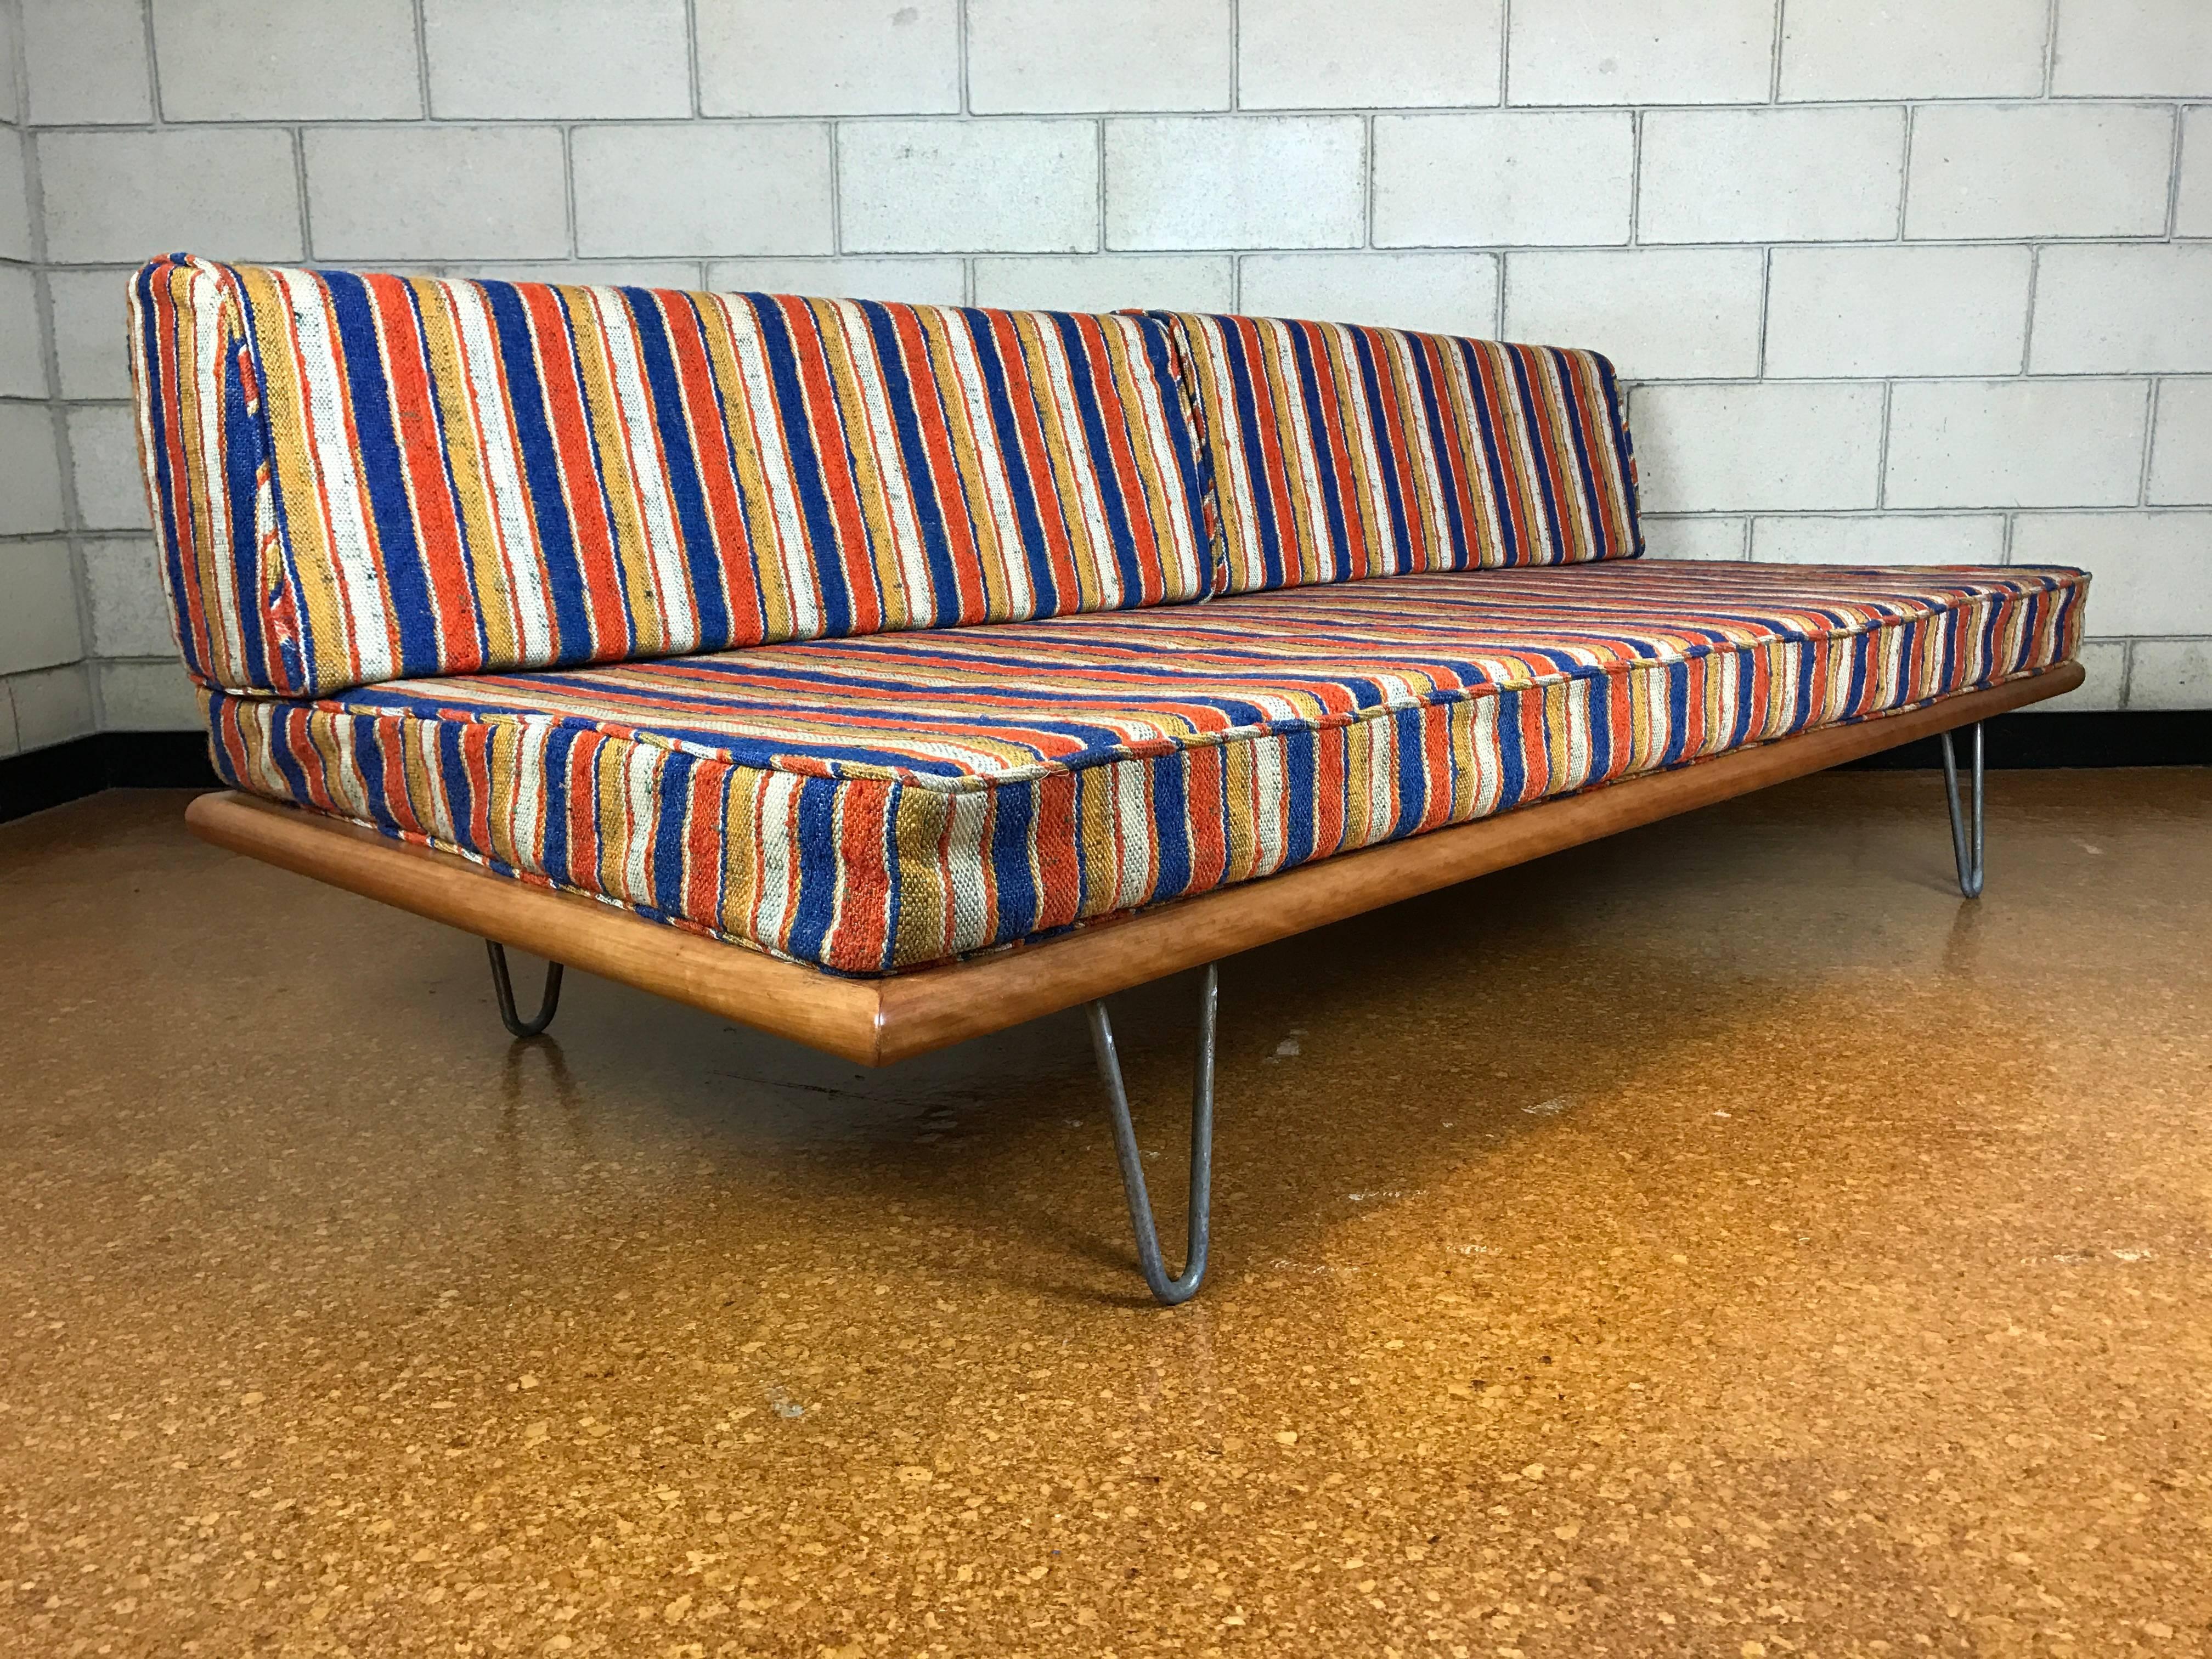 George Nelson for Herman Miller early daybed sofa with original Alexander Girard fabric.
Restored frame. Legs show age appropriate wear. Fabric is excellent. 

Measures: 75" wide x 33" deep x 27" tall. Seat height 15".